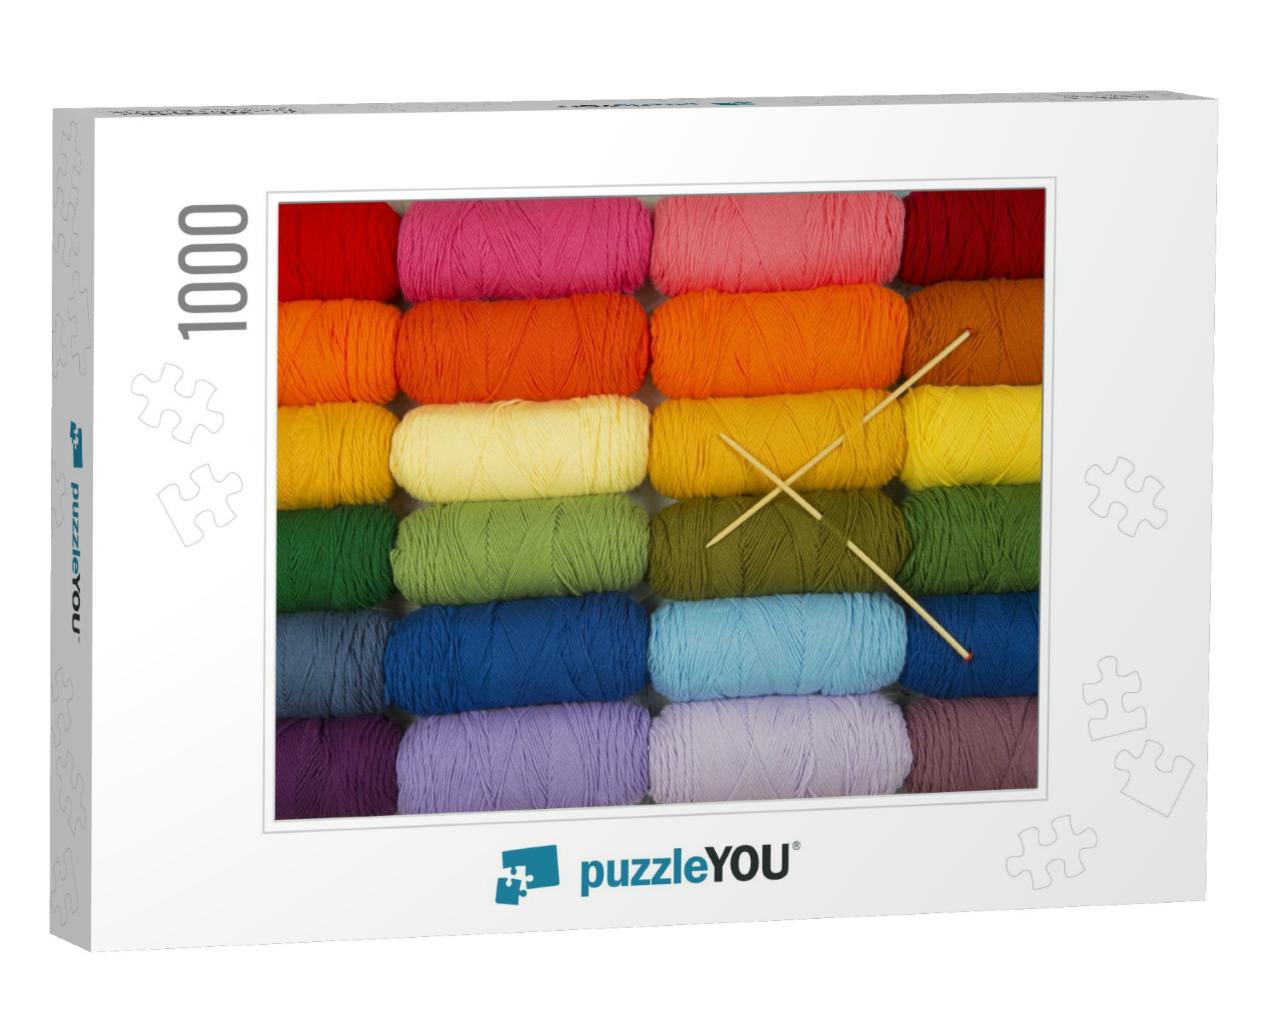 Colorful Yarn in Rainbow Rows Photo Collage Jigsaw Puzzle with 1000 pieces